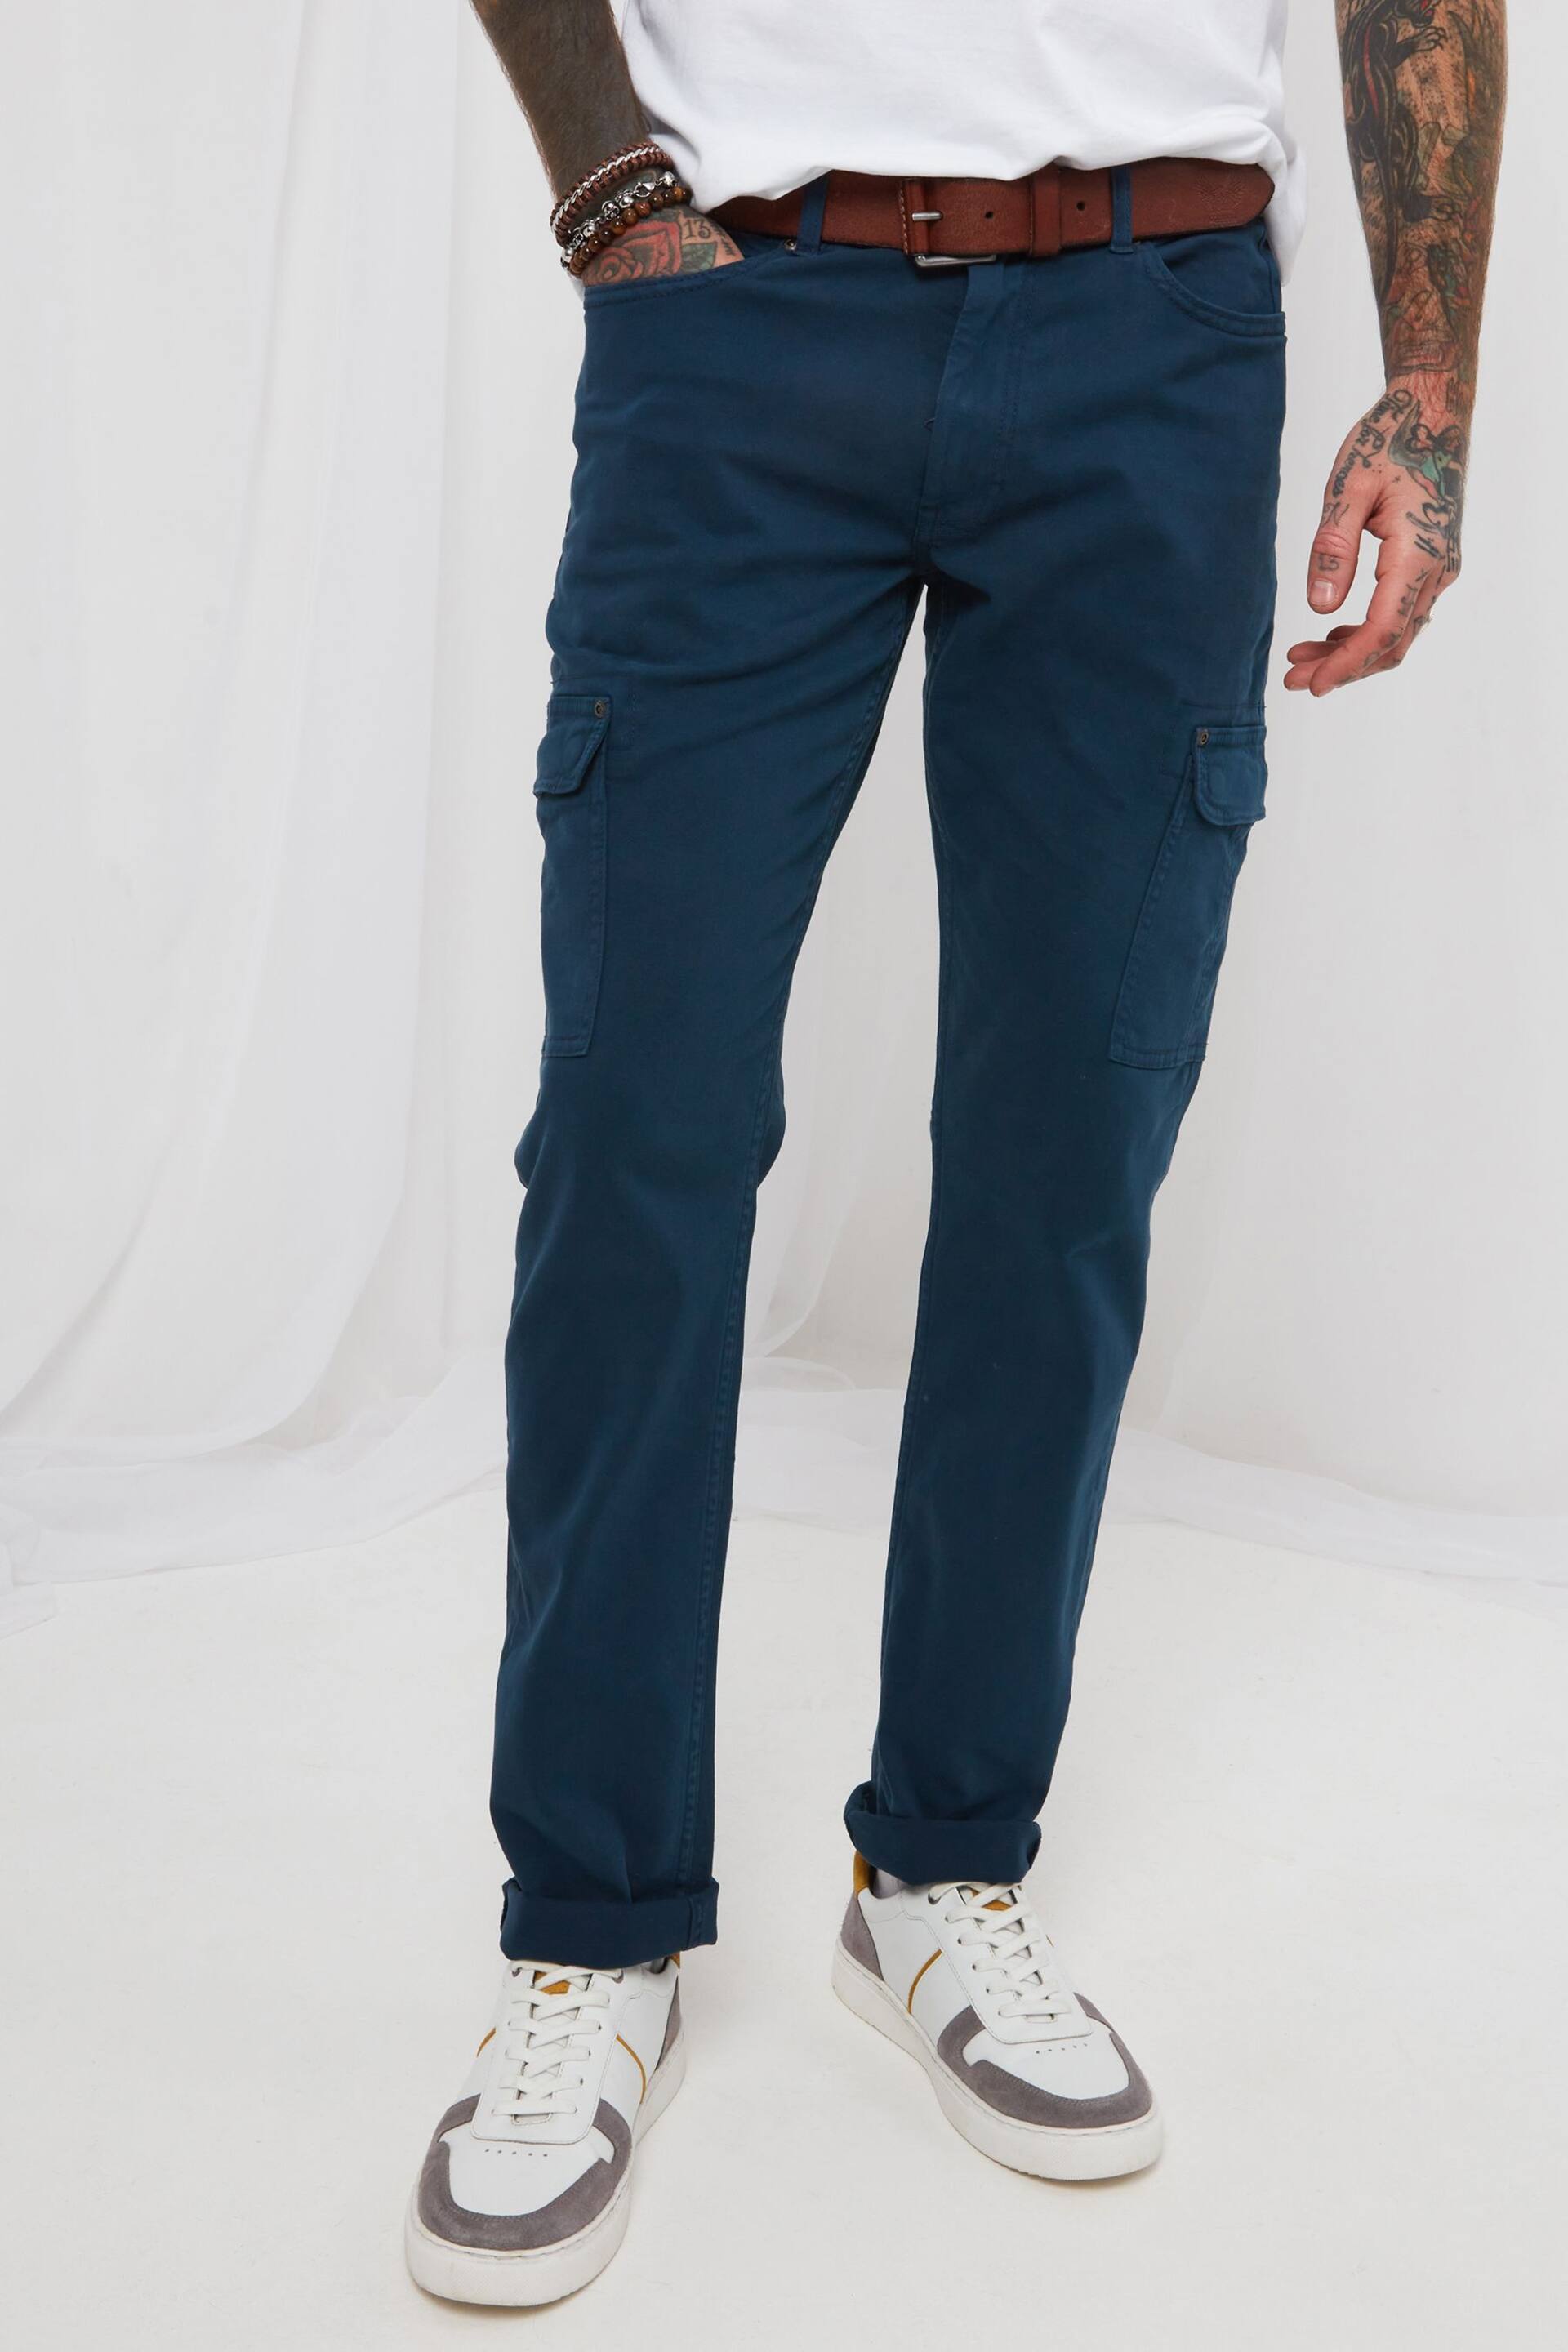 Joe Browns Blue Full Of Action Combat Trousers - Image 1 of 5